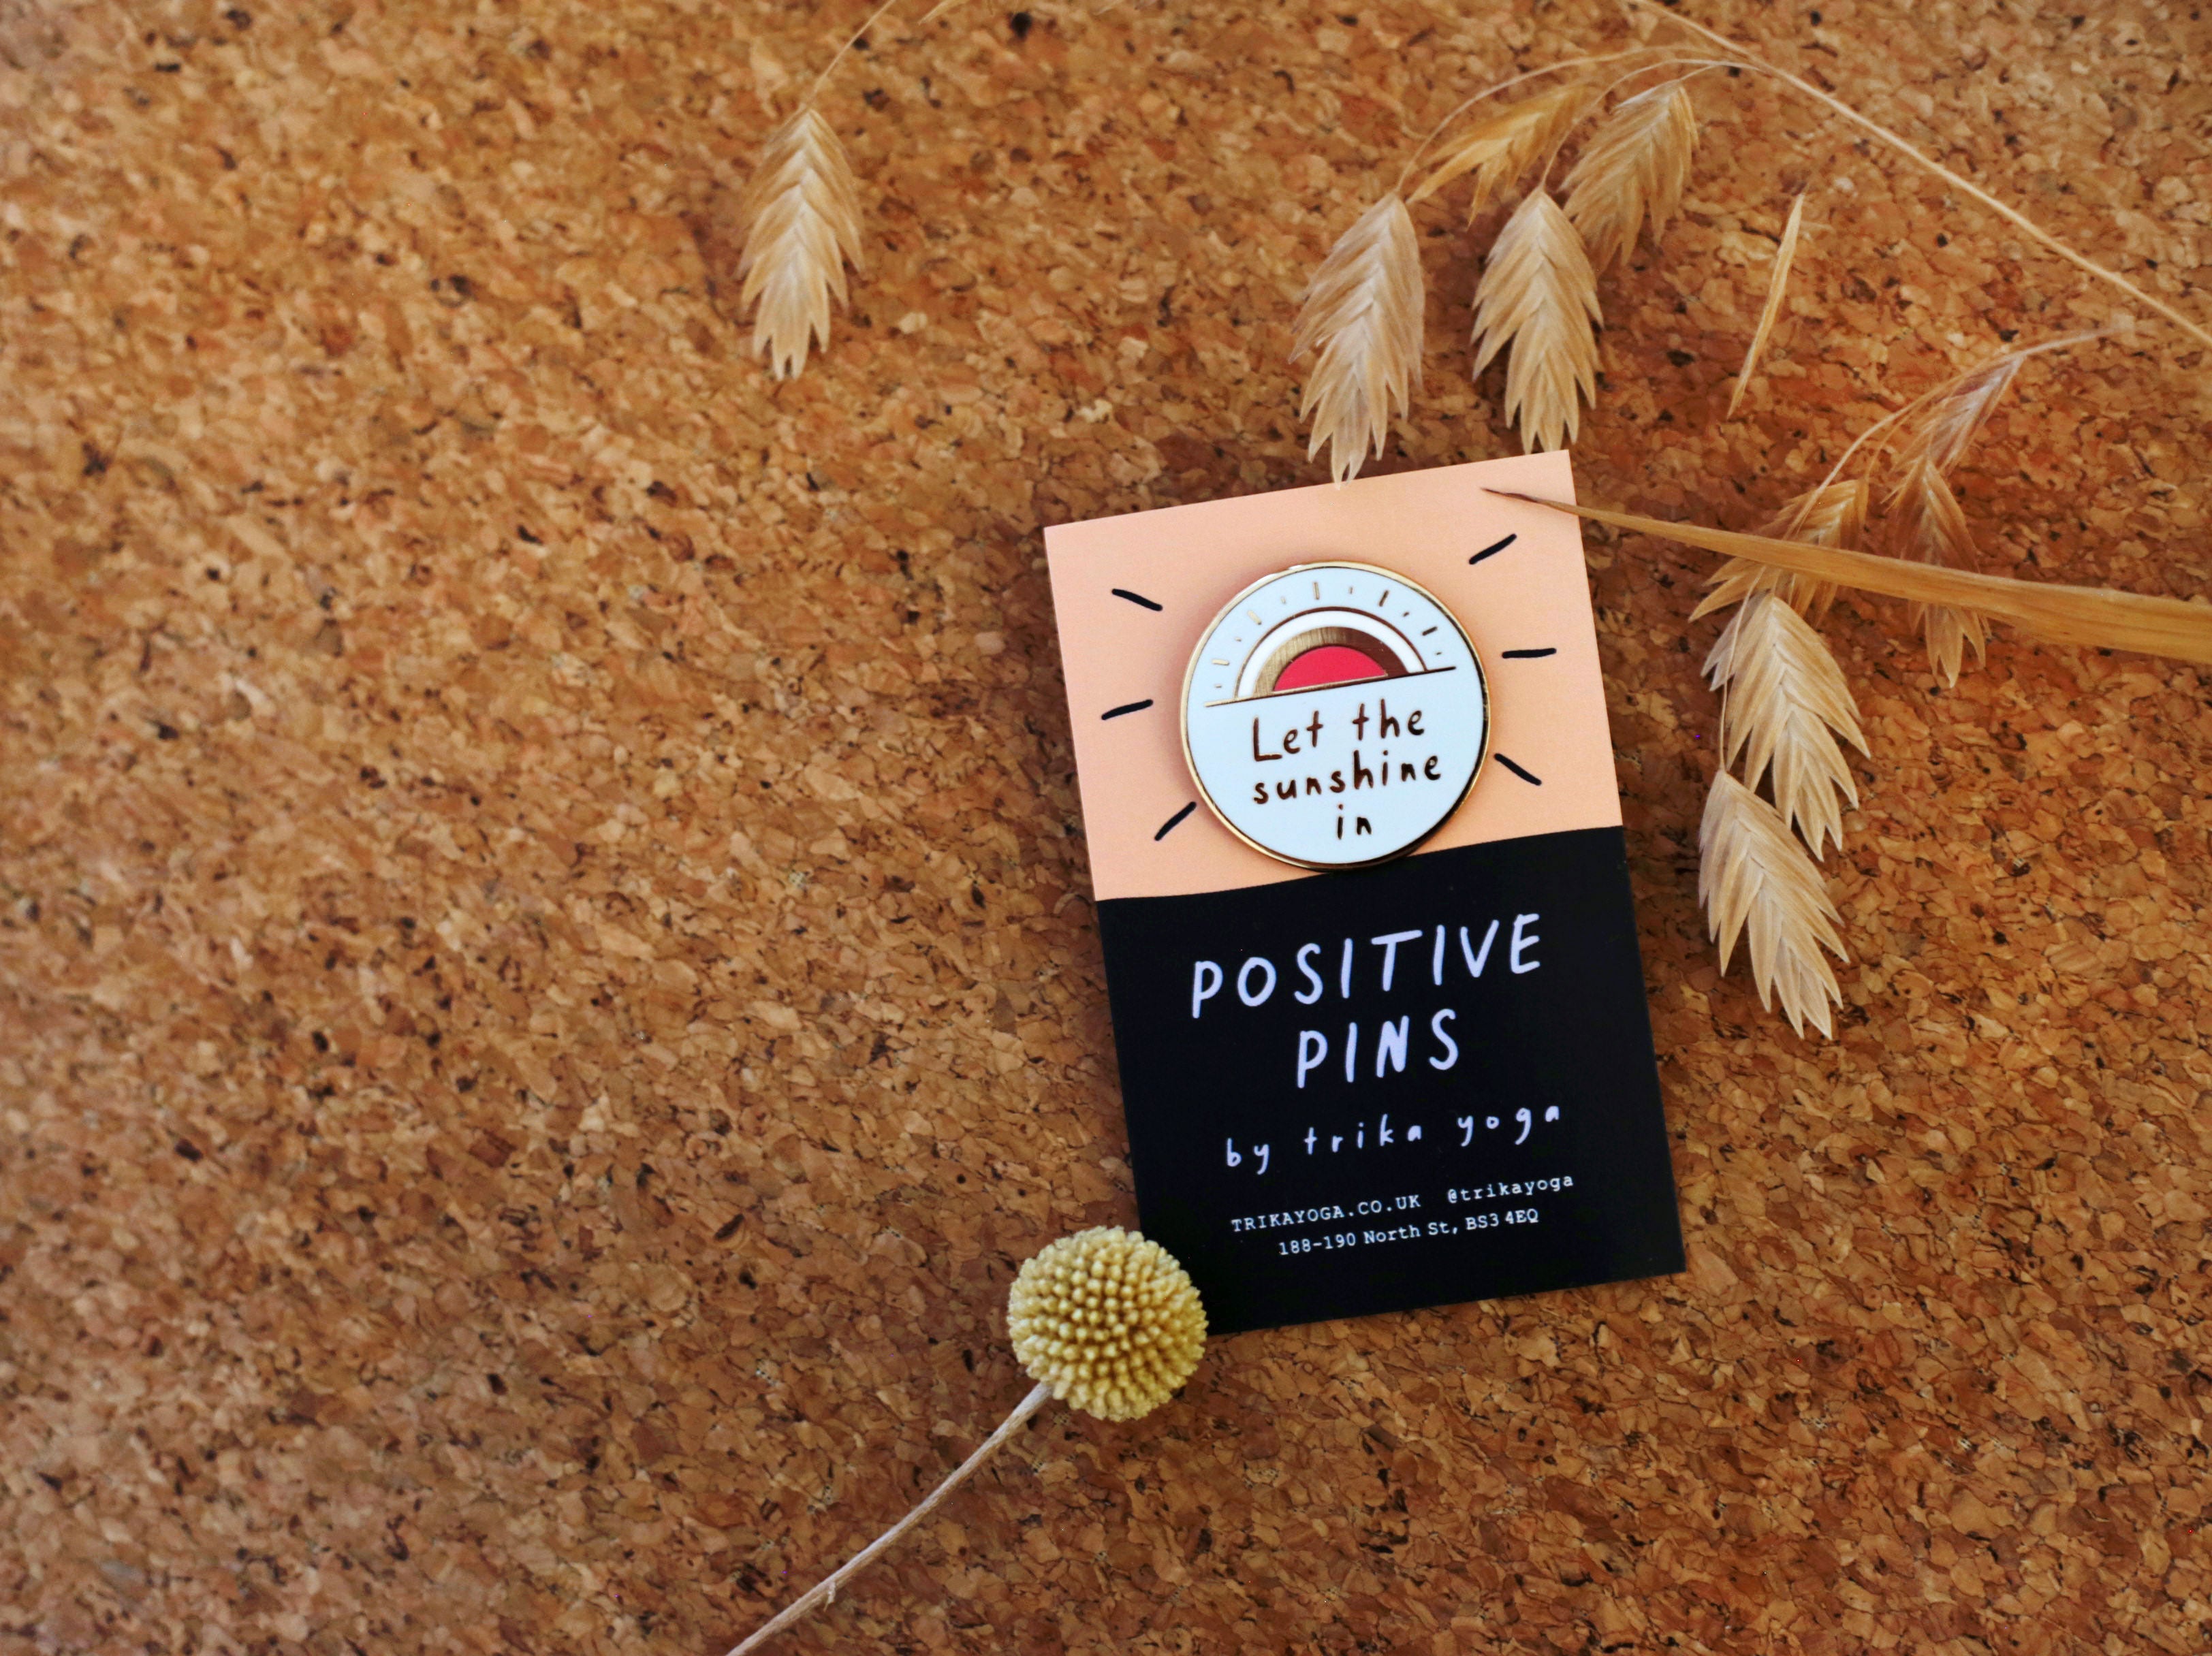 Positive Pins: Let the Sunshine In